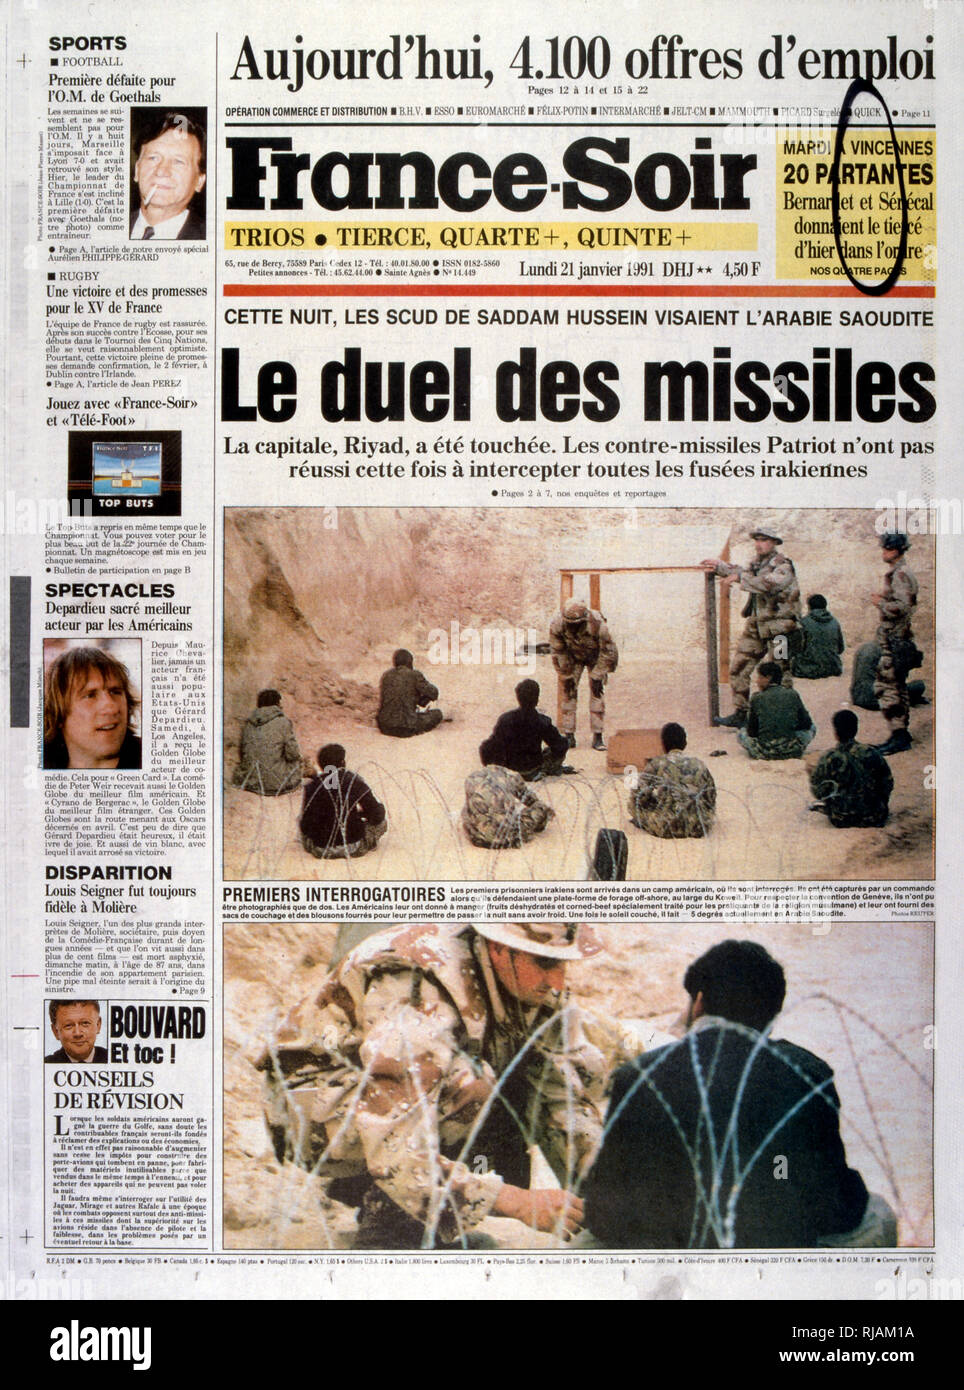 Headline in 'France-Soir' a French newspaper, 21st January 1991, concerning escalating action in the Gulf War (2 August 1990 - 28 February 1991). codenamed Operation Desert Shield and Operation Desert Storm, the war waged by coalition forces from 35 nations led by the United States against Iraq in response to Iraq's invasion and annexation of Kuwait. Stock Photo